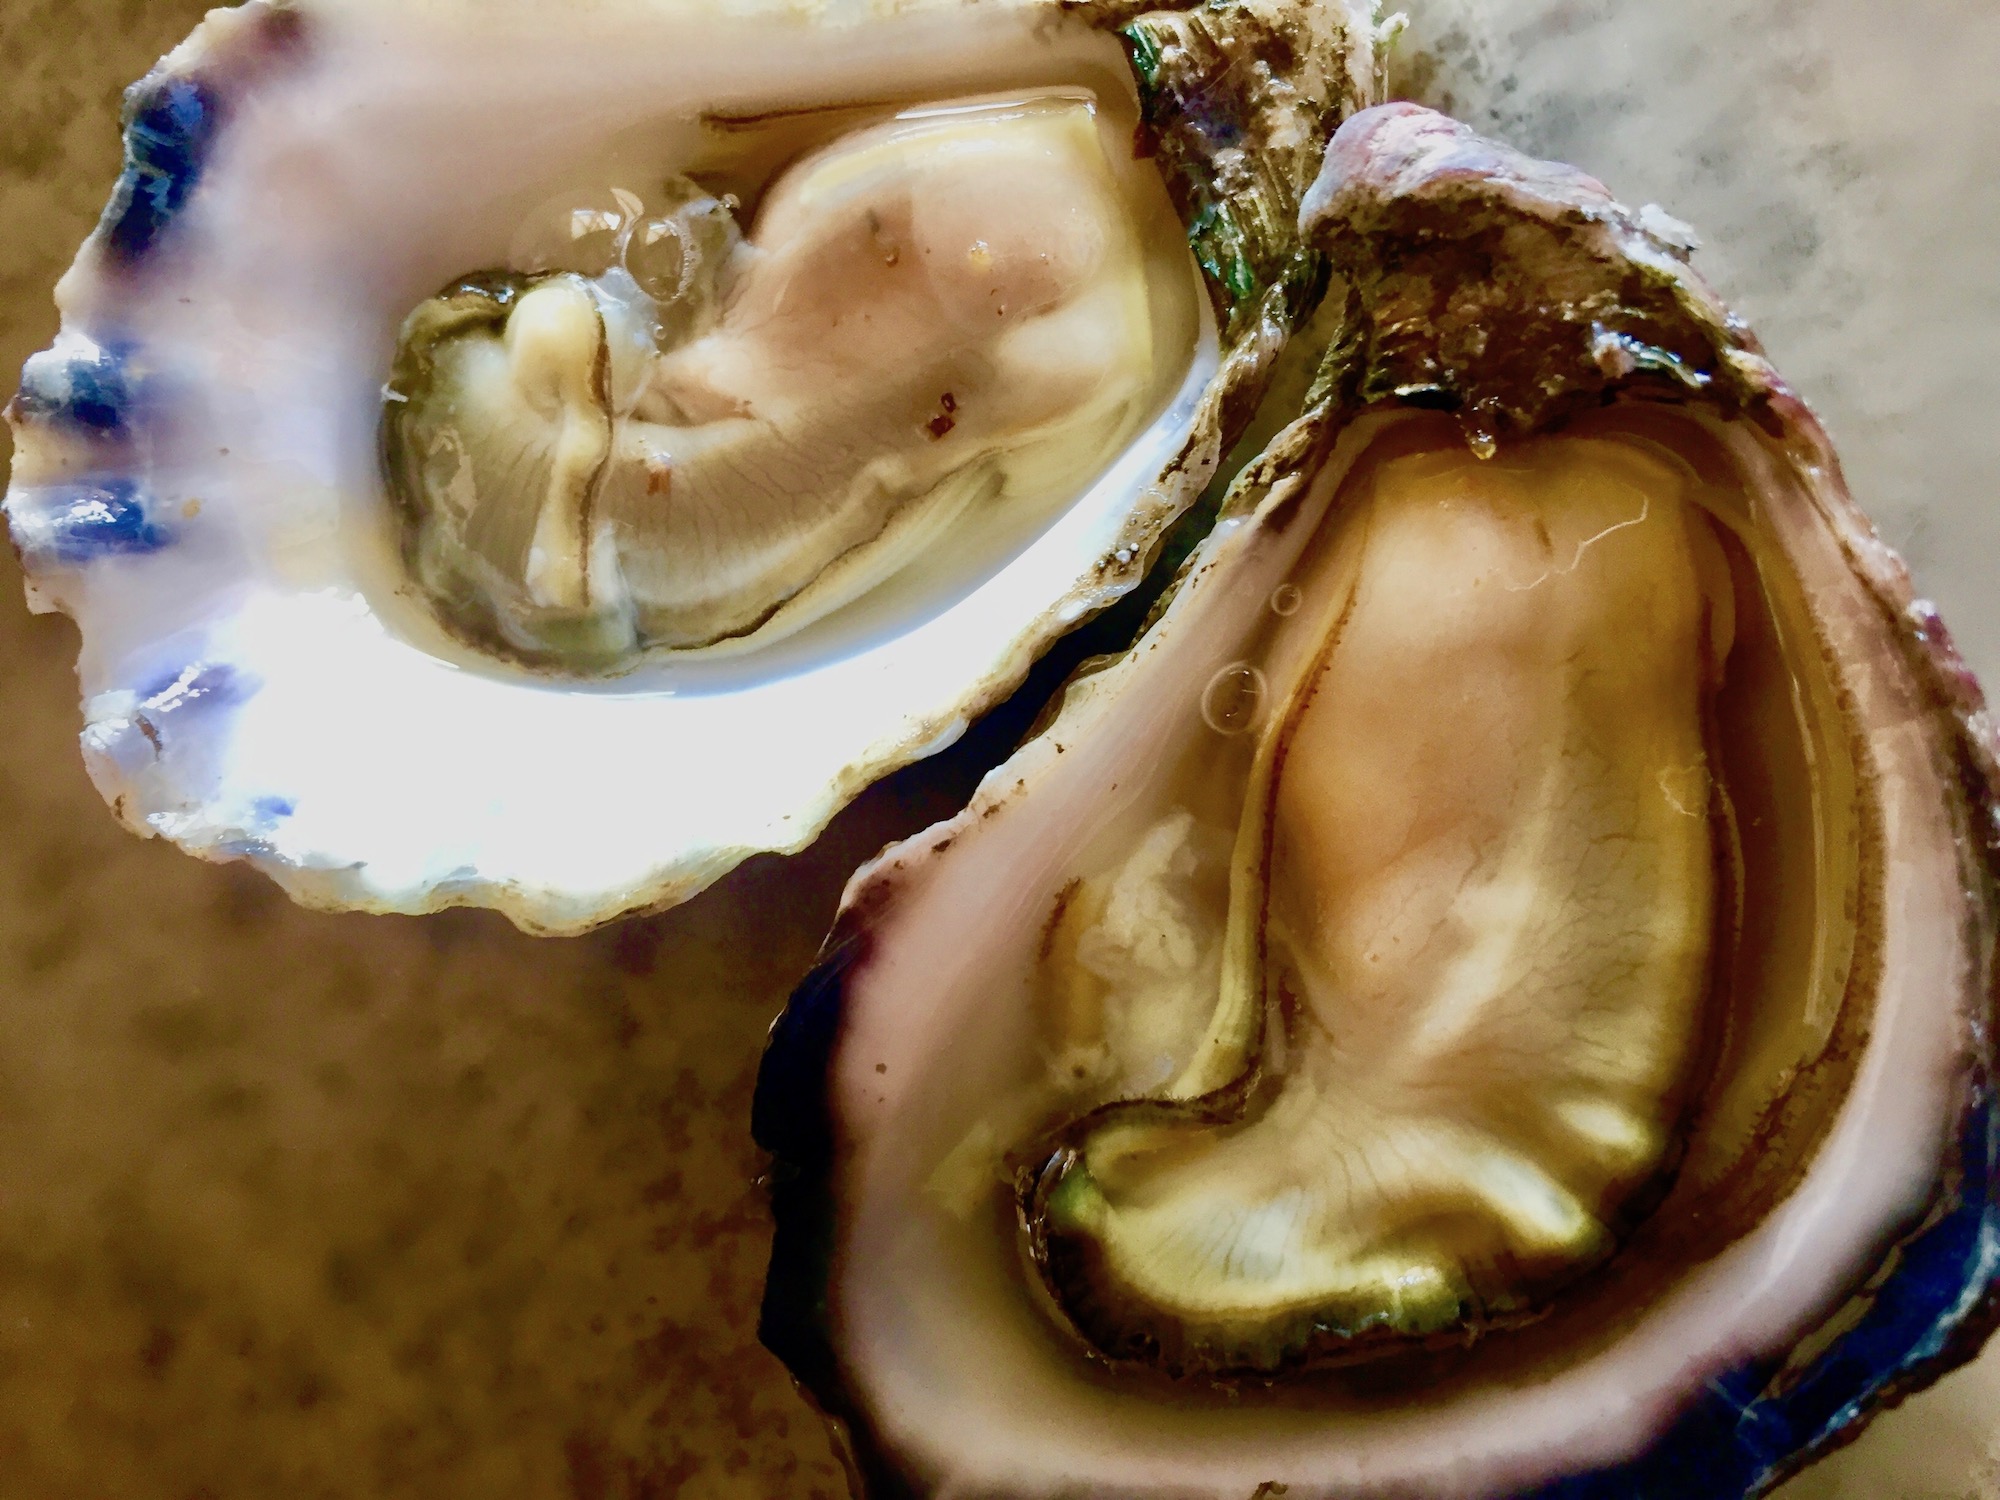 Oyster, how do I love thee? Let me count the ways: naked, full cup and busting fat